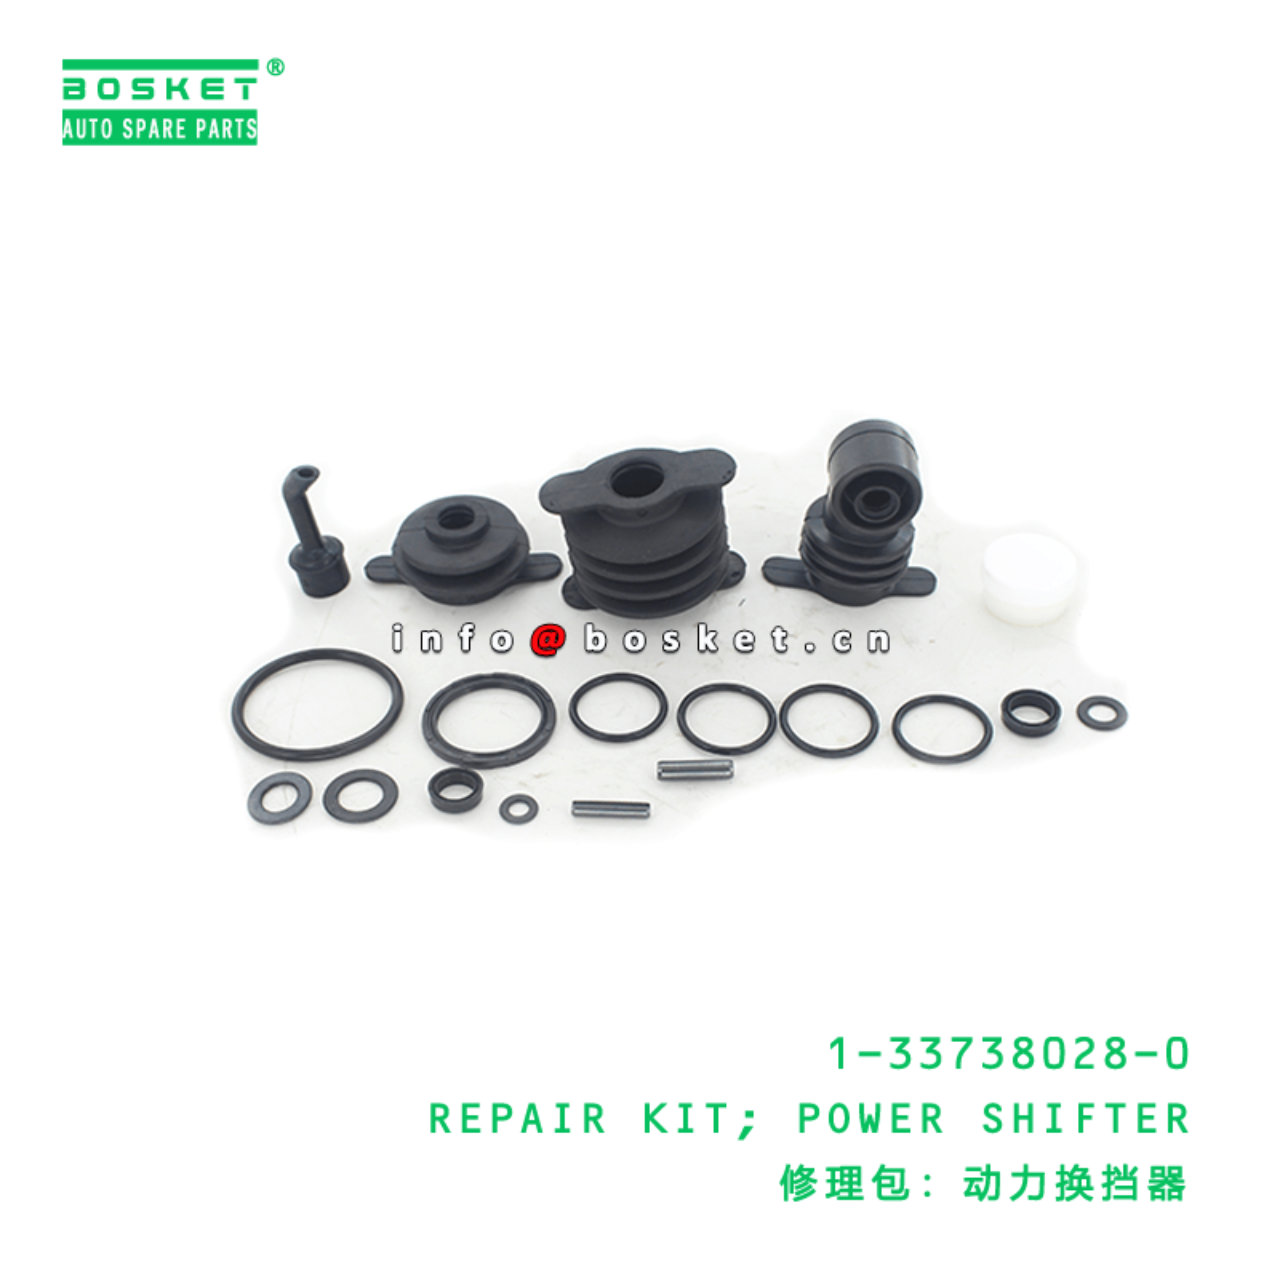 1-33738028-0 Power Shifter Repair Kit 1337380280 Suitable for 